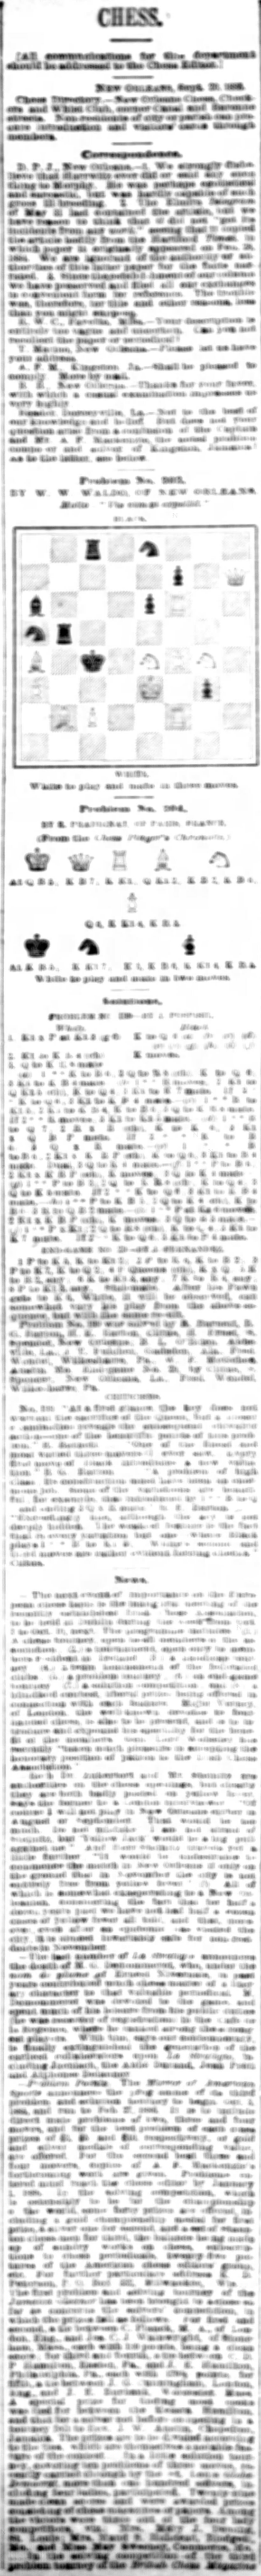 1885.09.20-01 New Orleans Times-Democrat.png